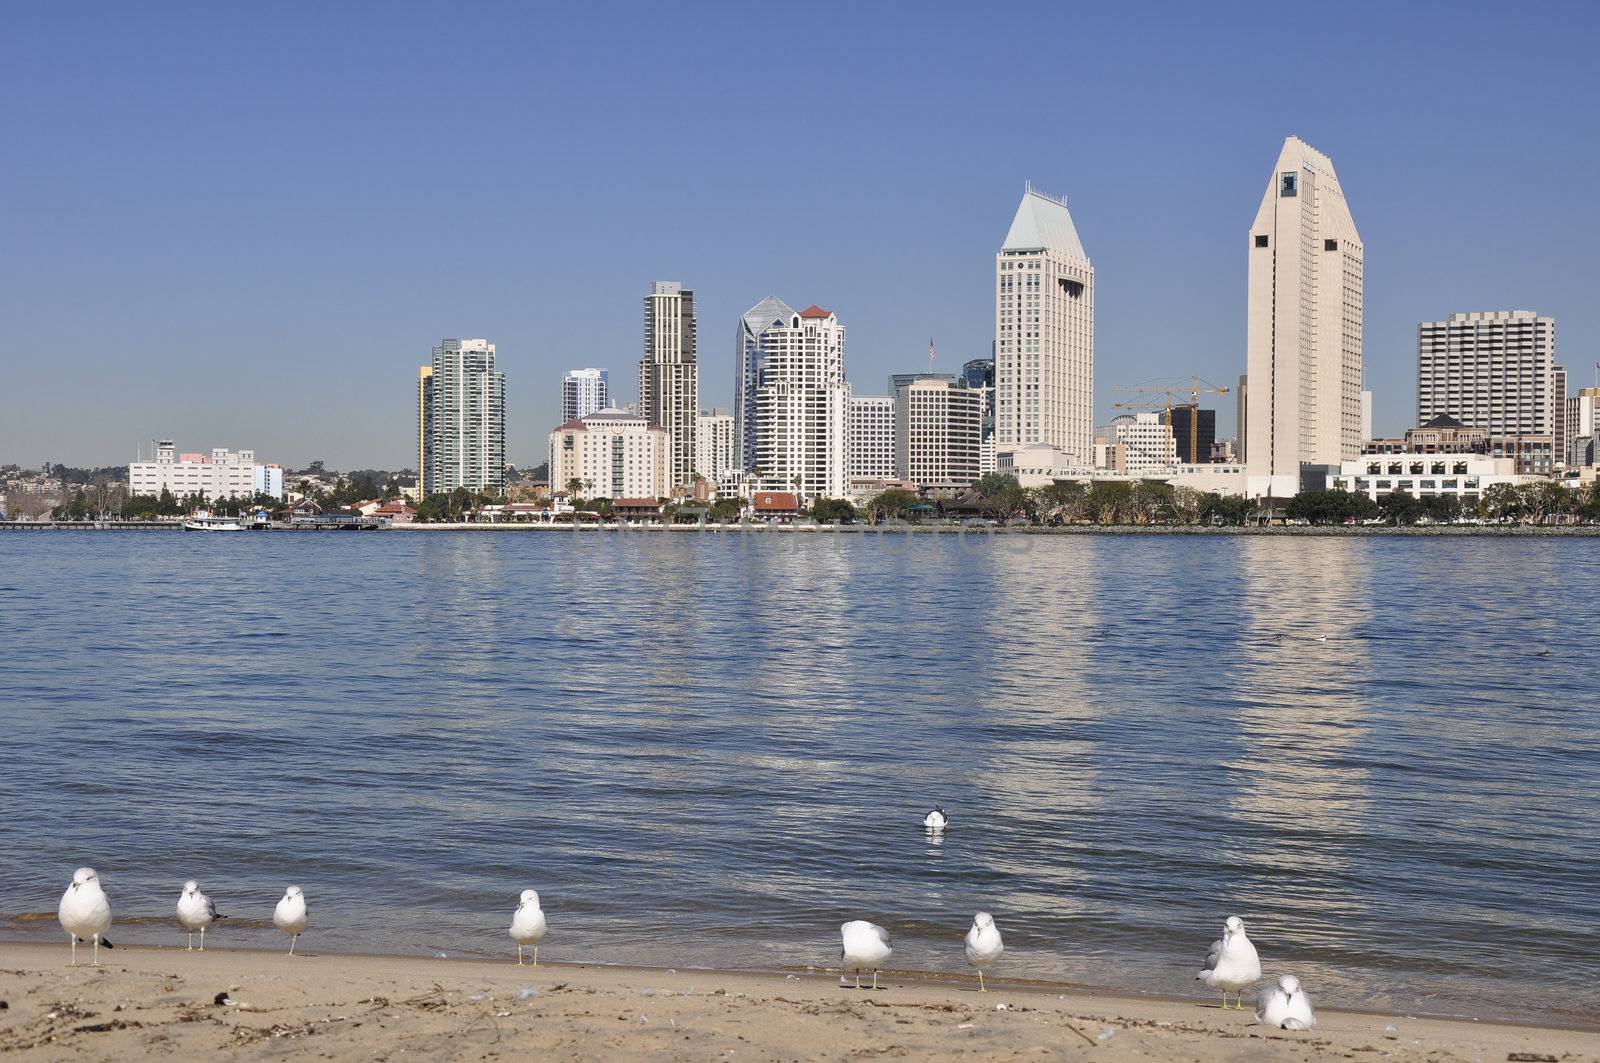 Seagulls and Skyline by PJ1960